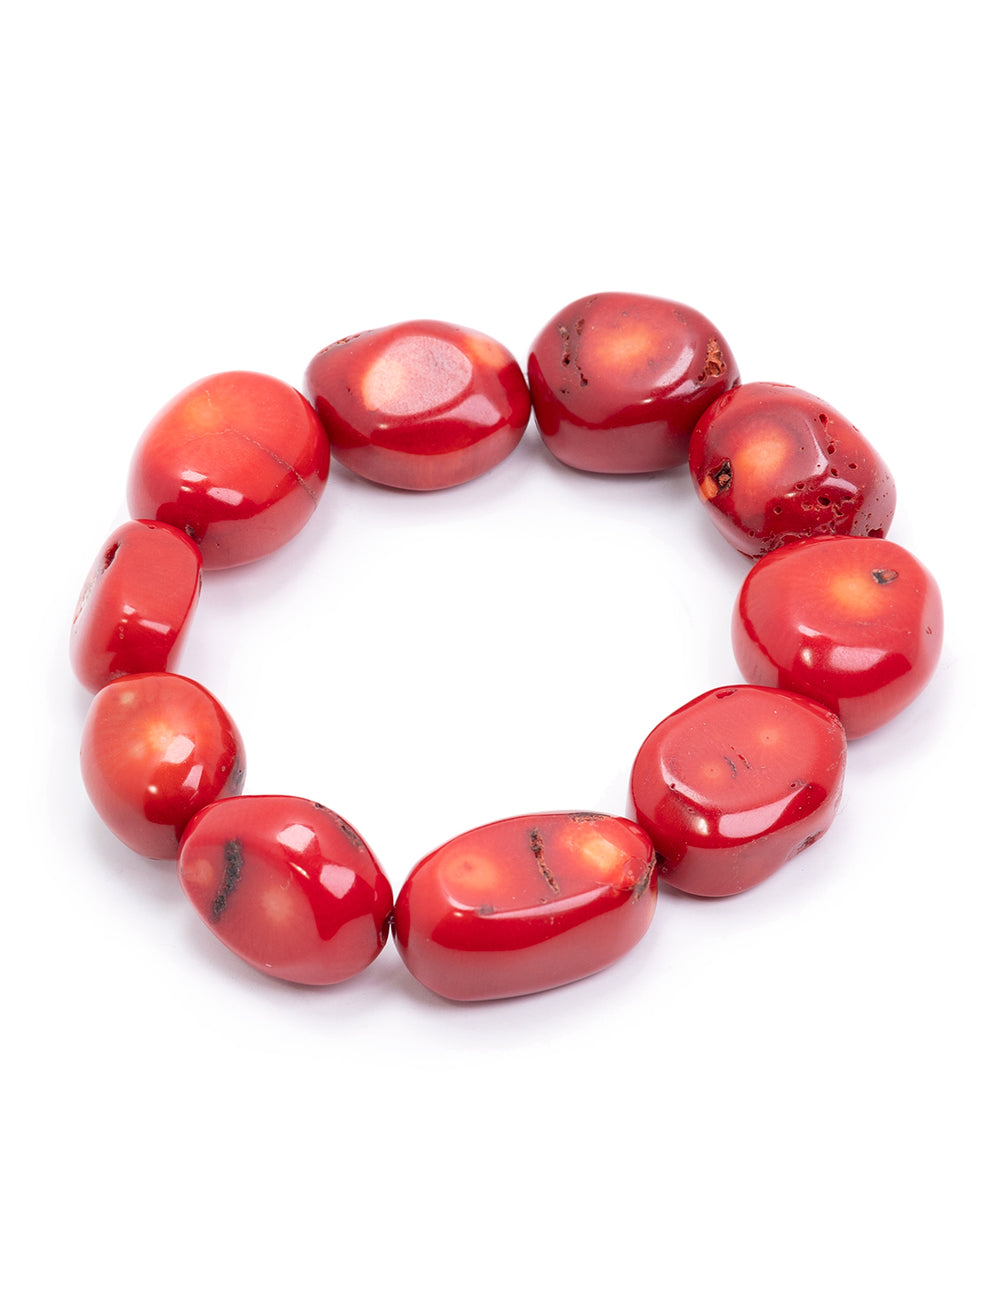 Close-up view of AV Max's red coral nugget bracelet.